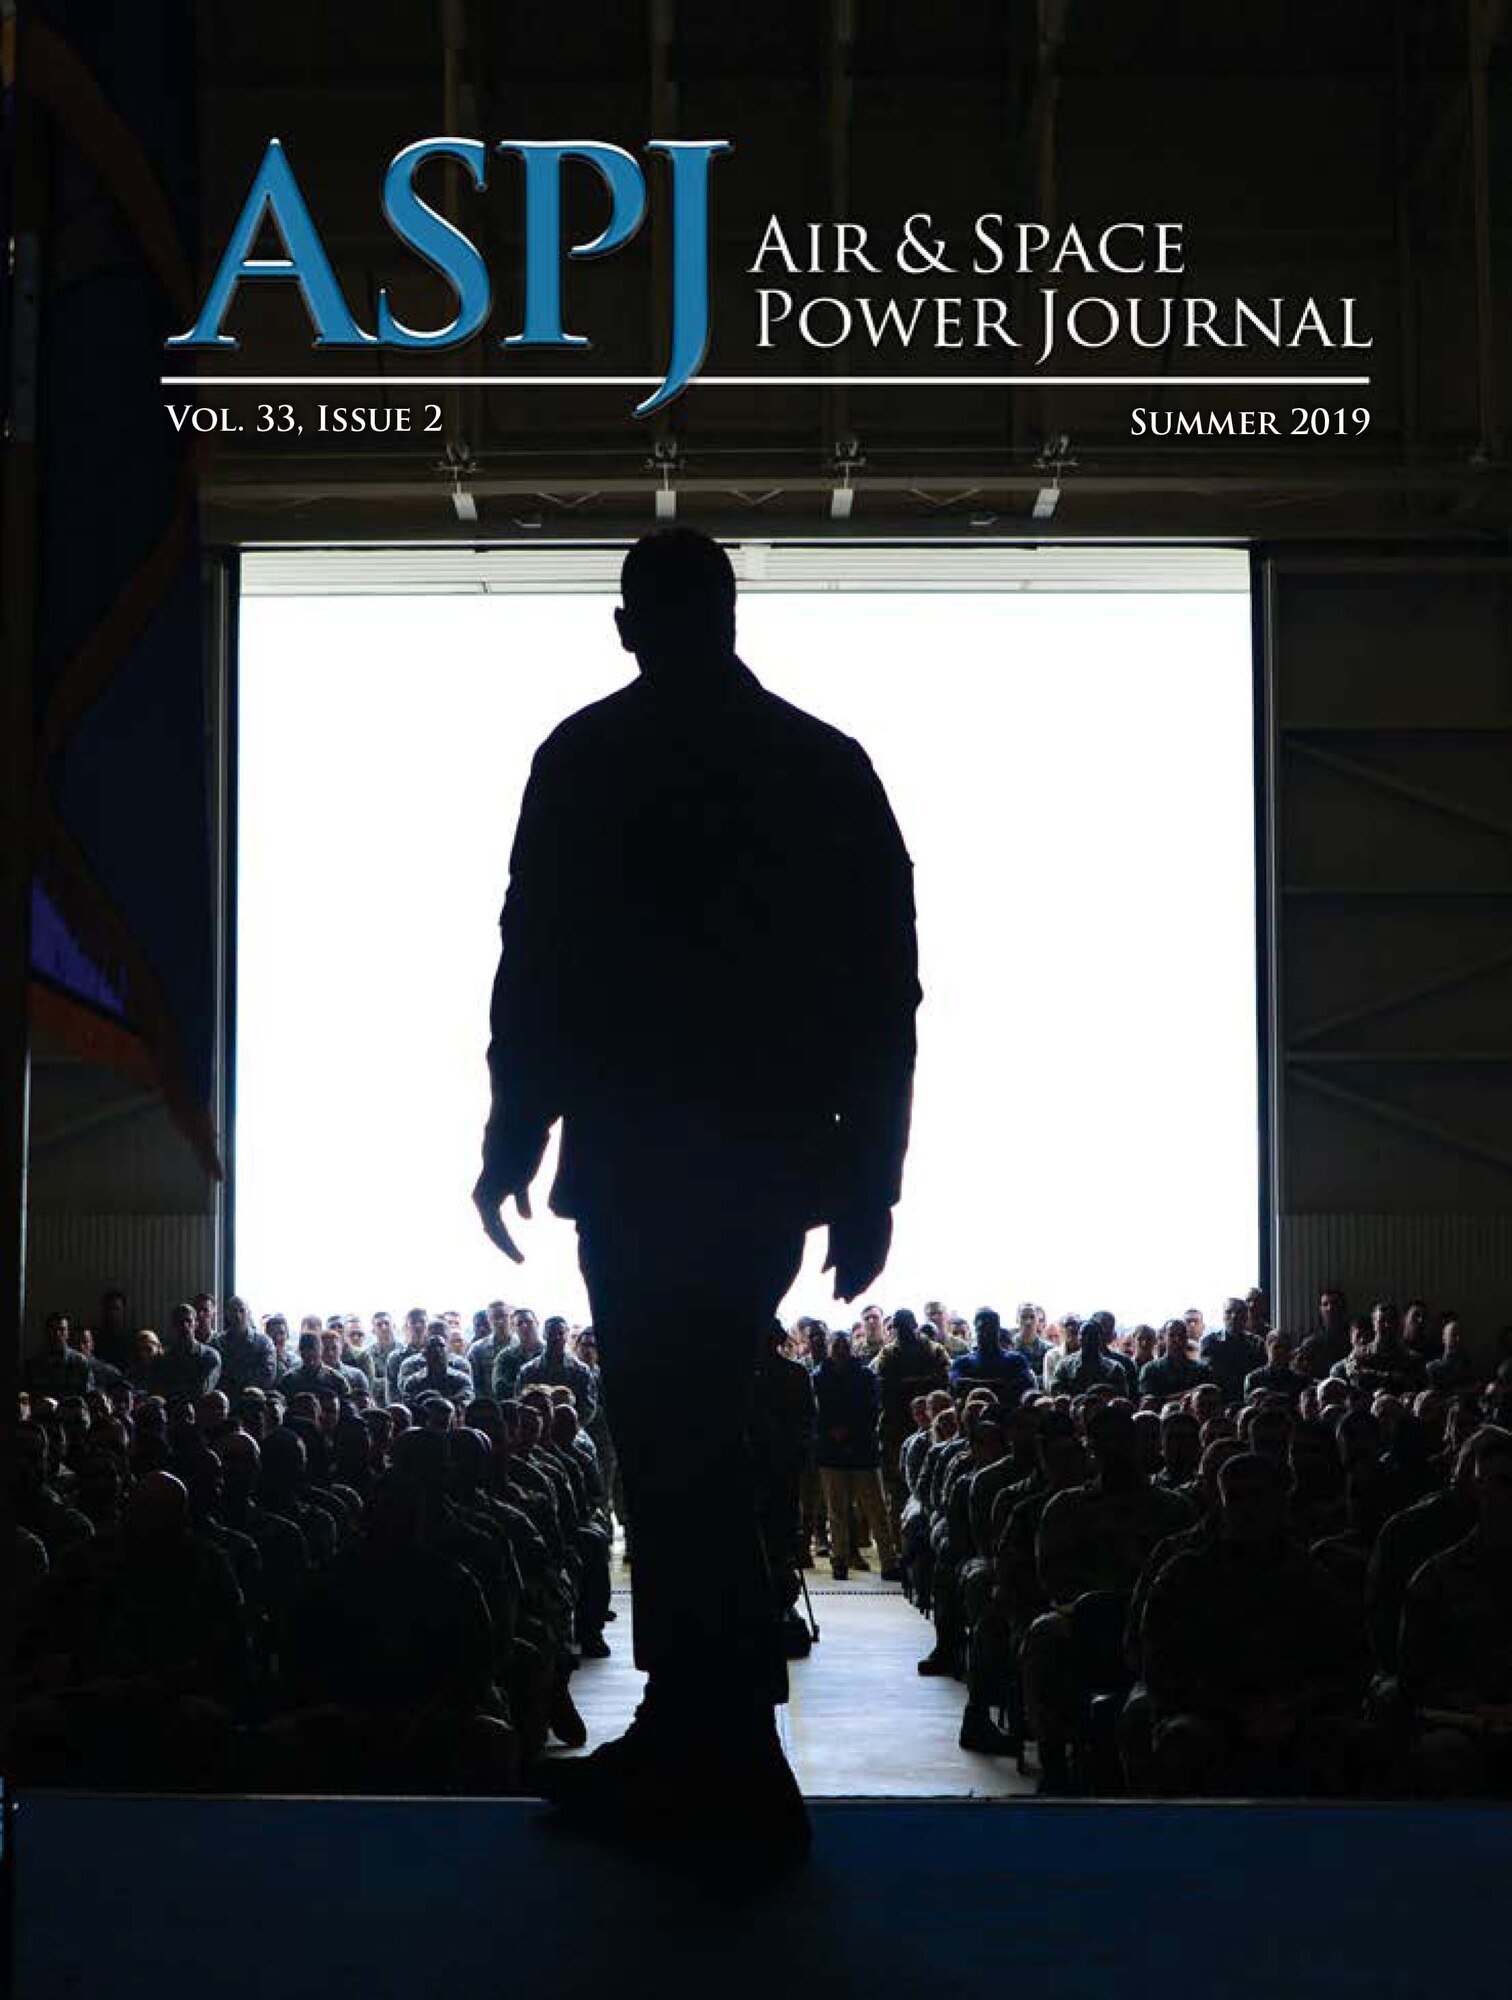 The summer 2019 Air and Space Power Journal, published by Air University Press, is available at https://www.airuniversity.af.edu/ASPJ/.